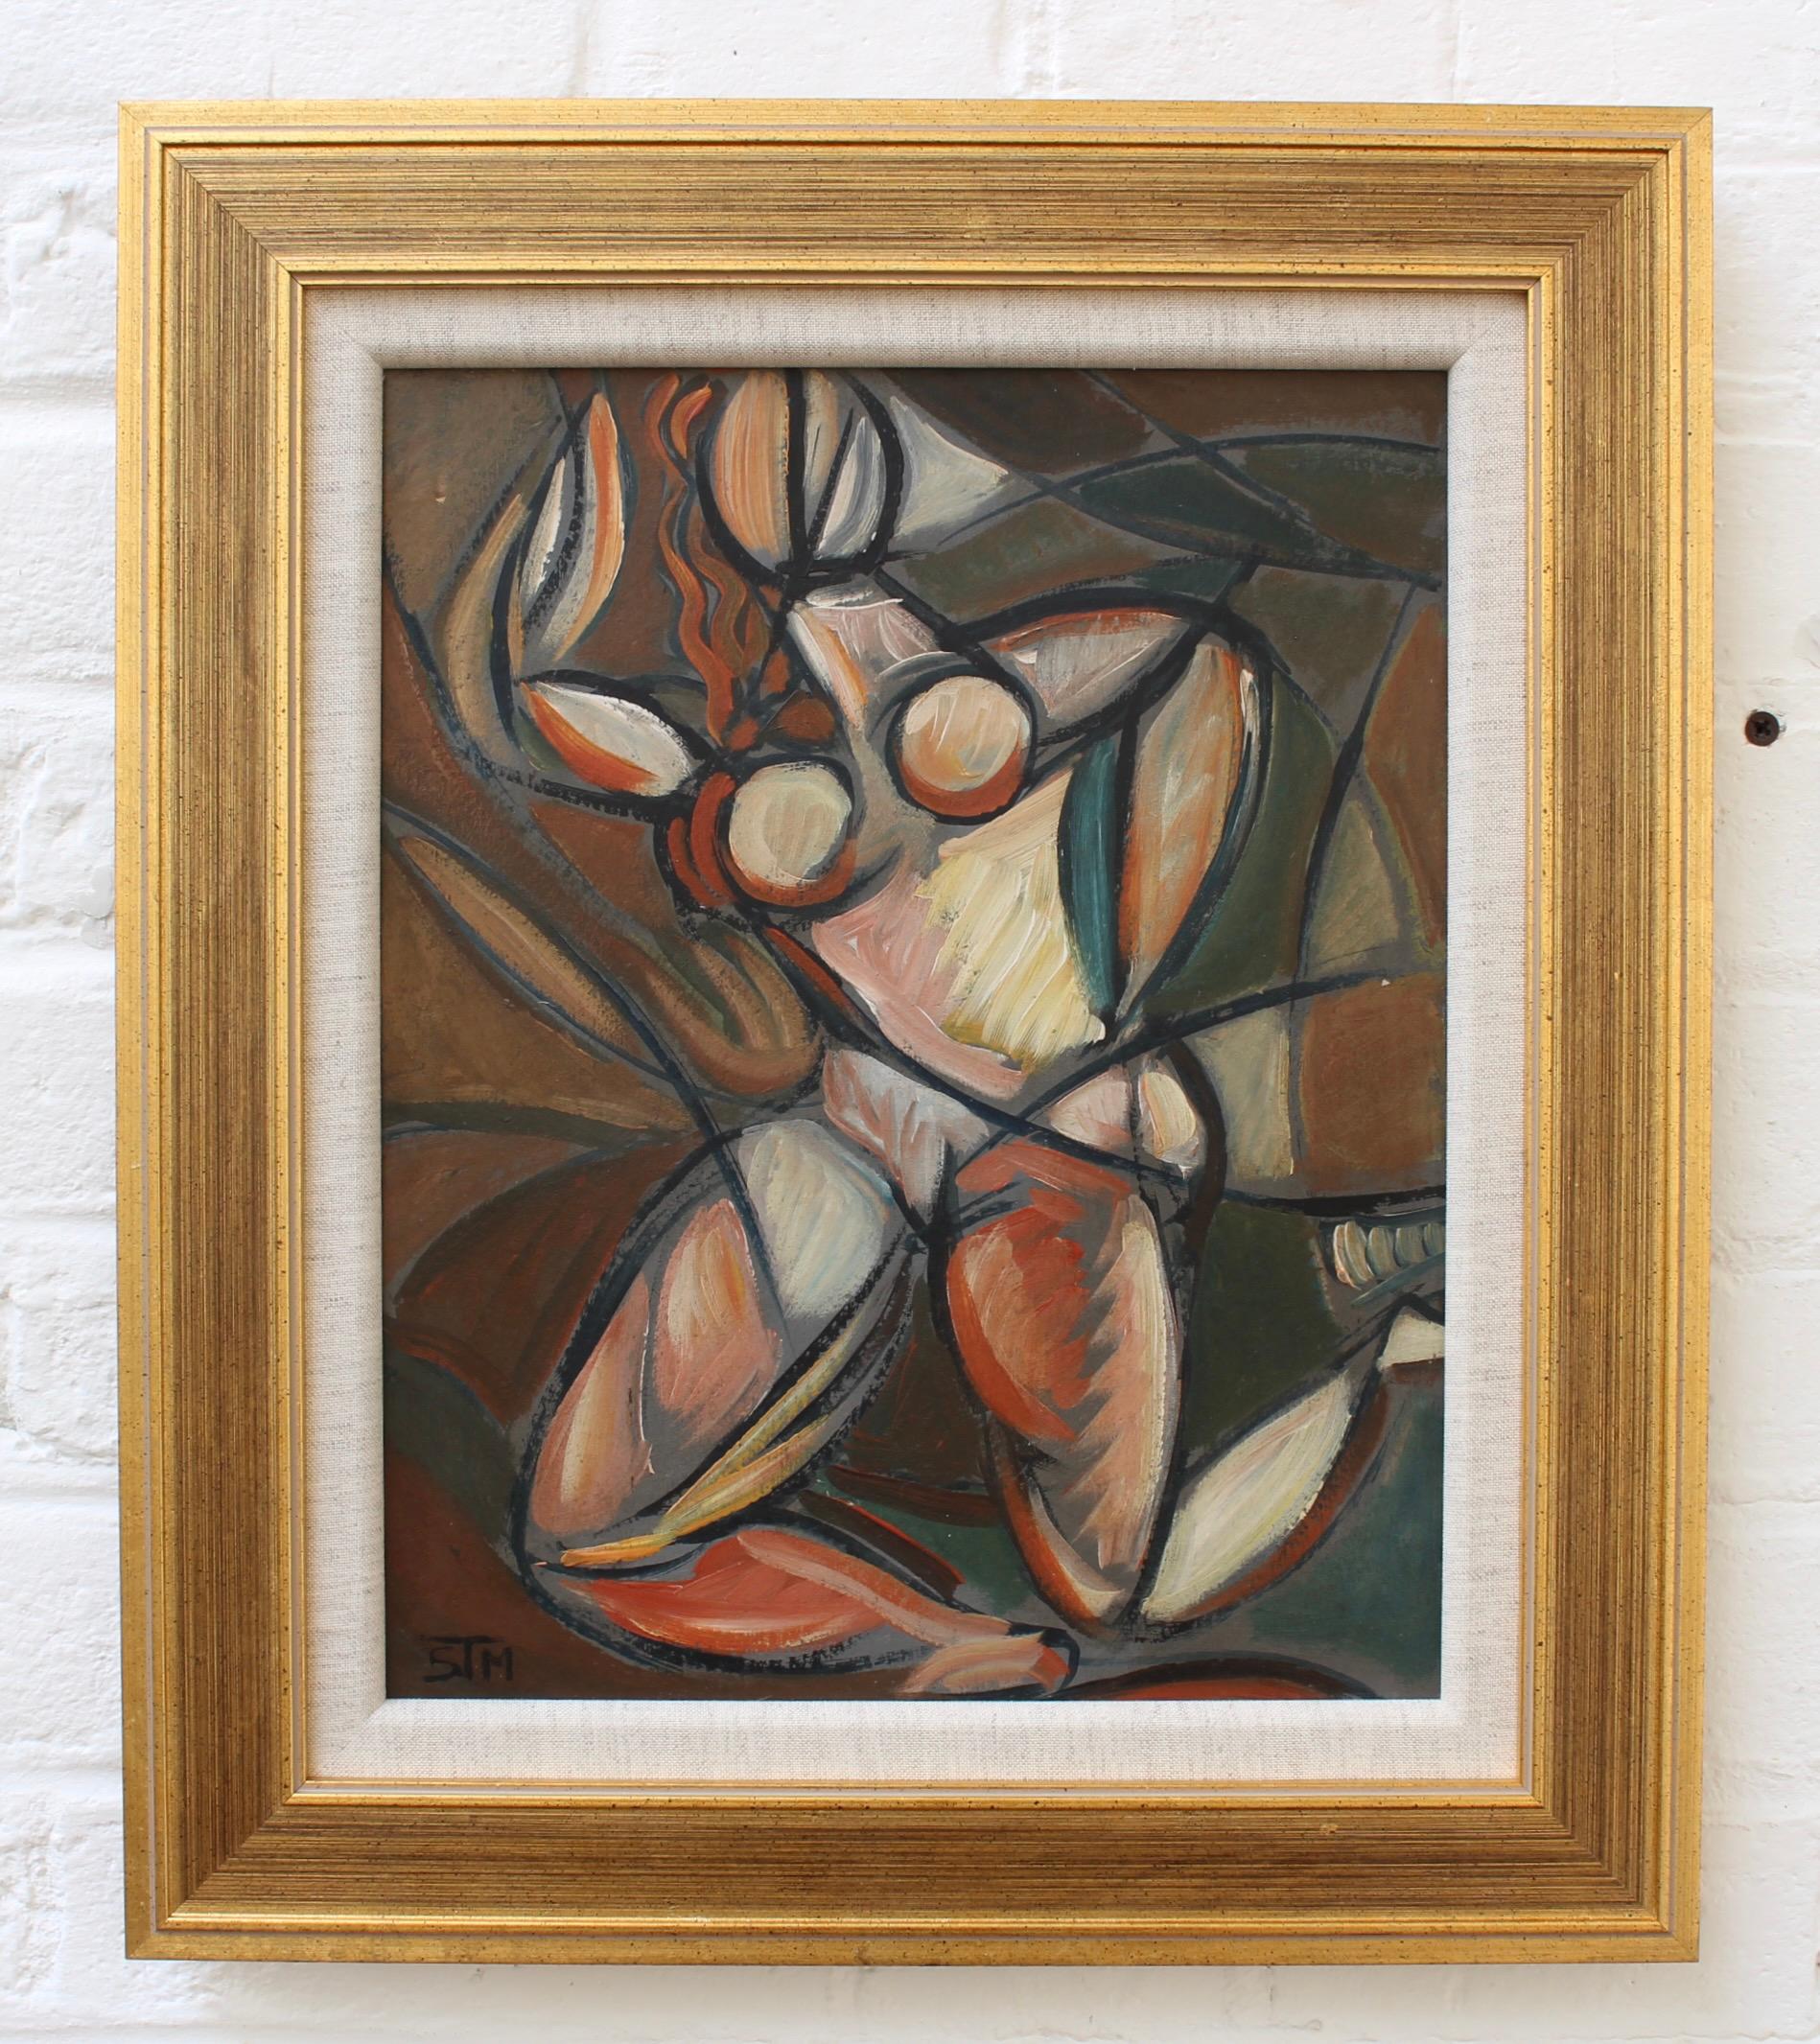 Untitled Cubist Figure - Painting by STM